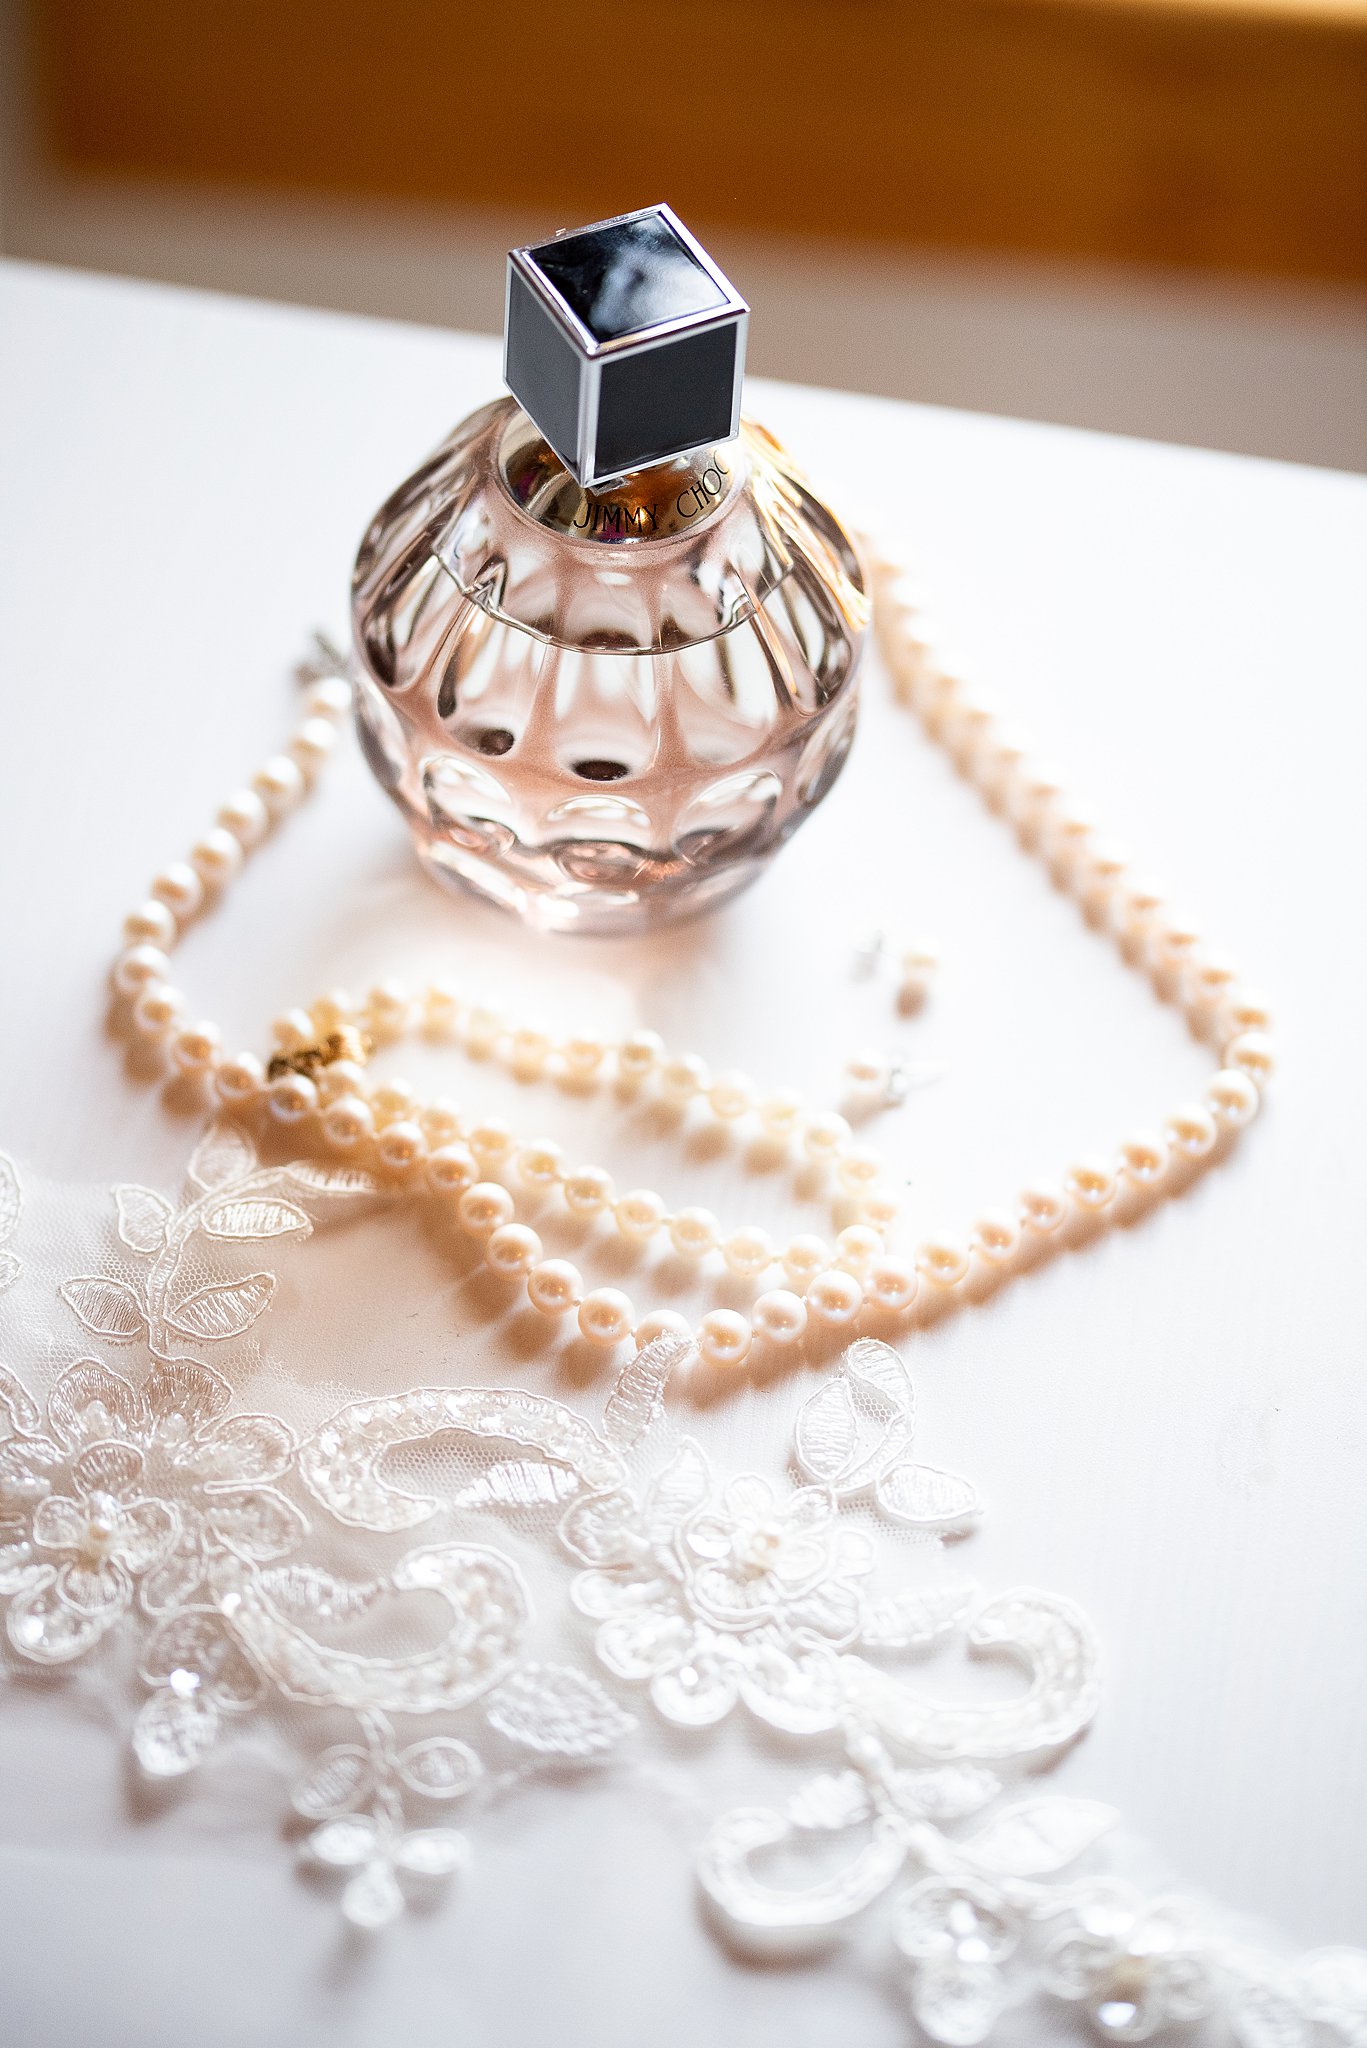 perfume, peral necklace, and lace at a wedding